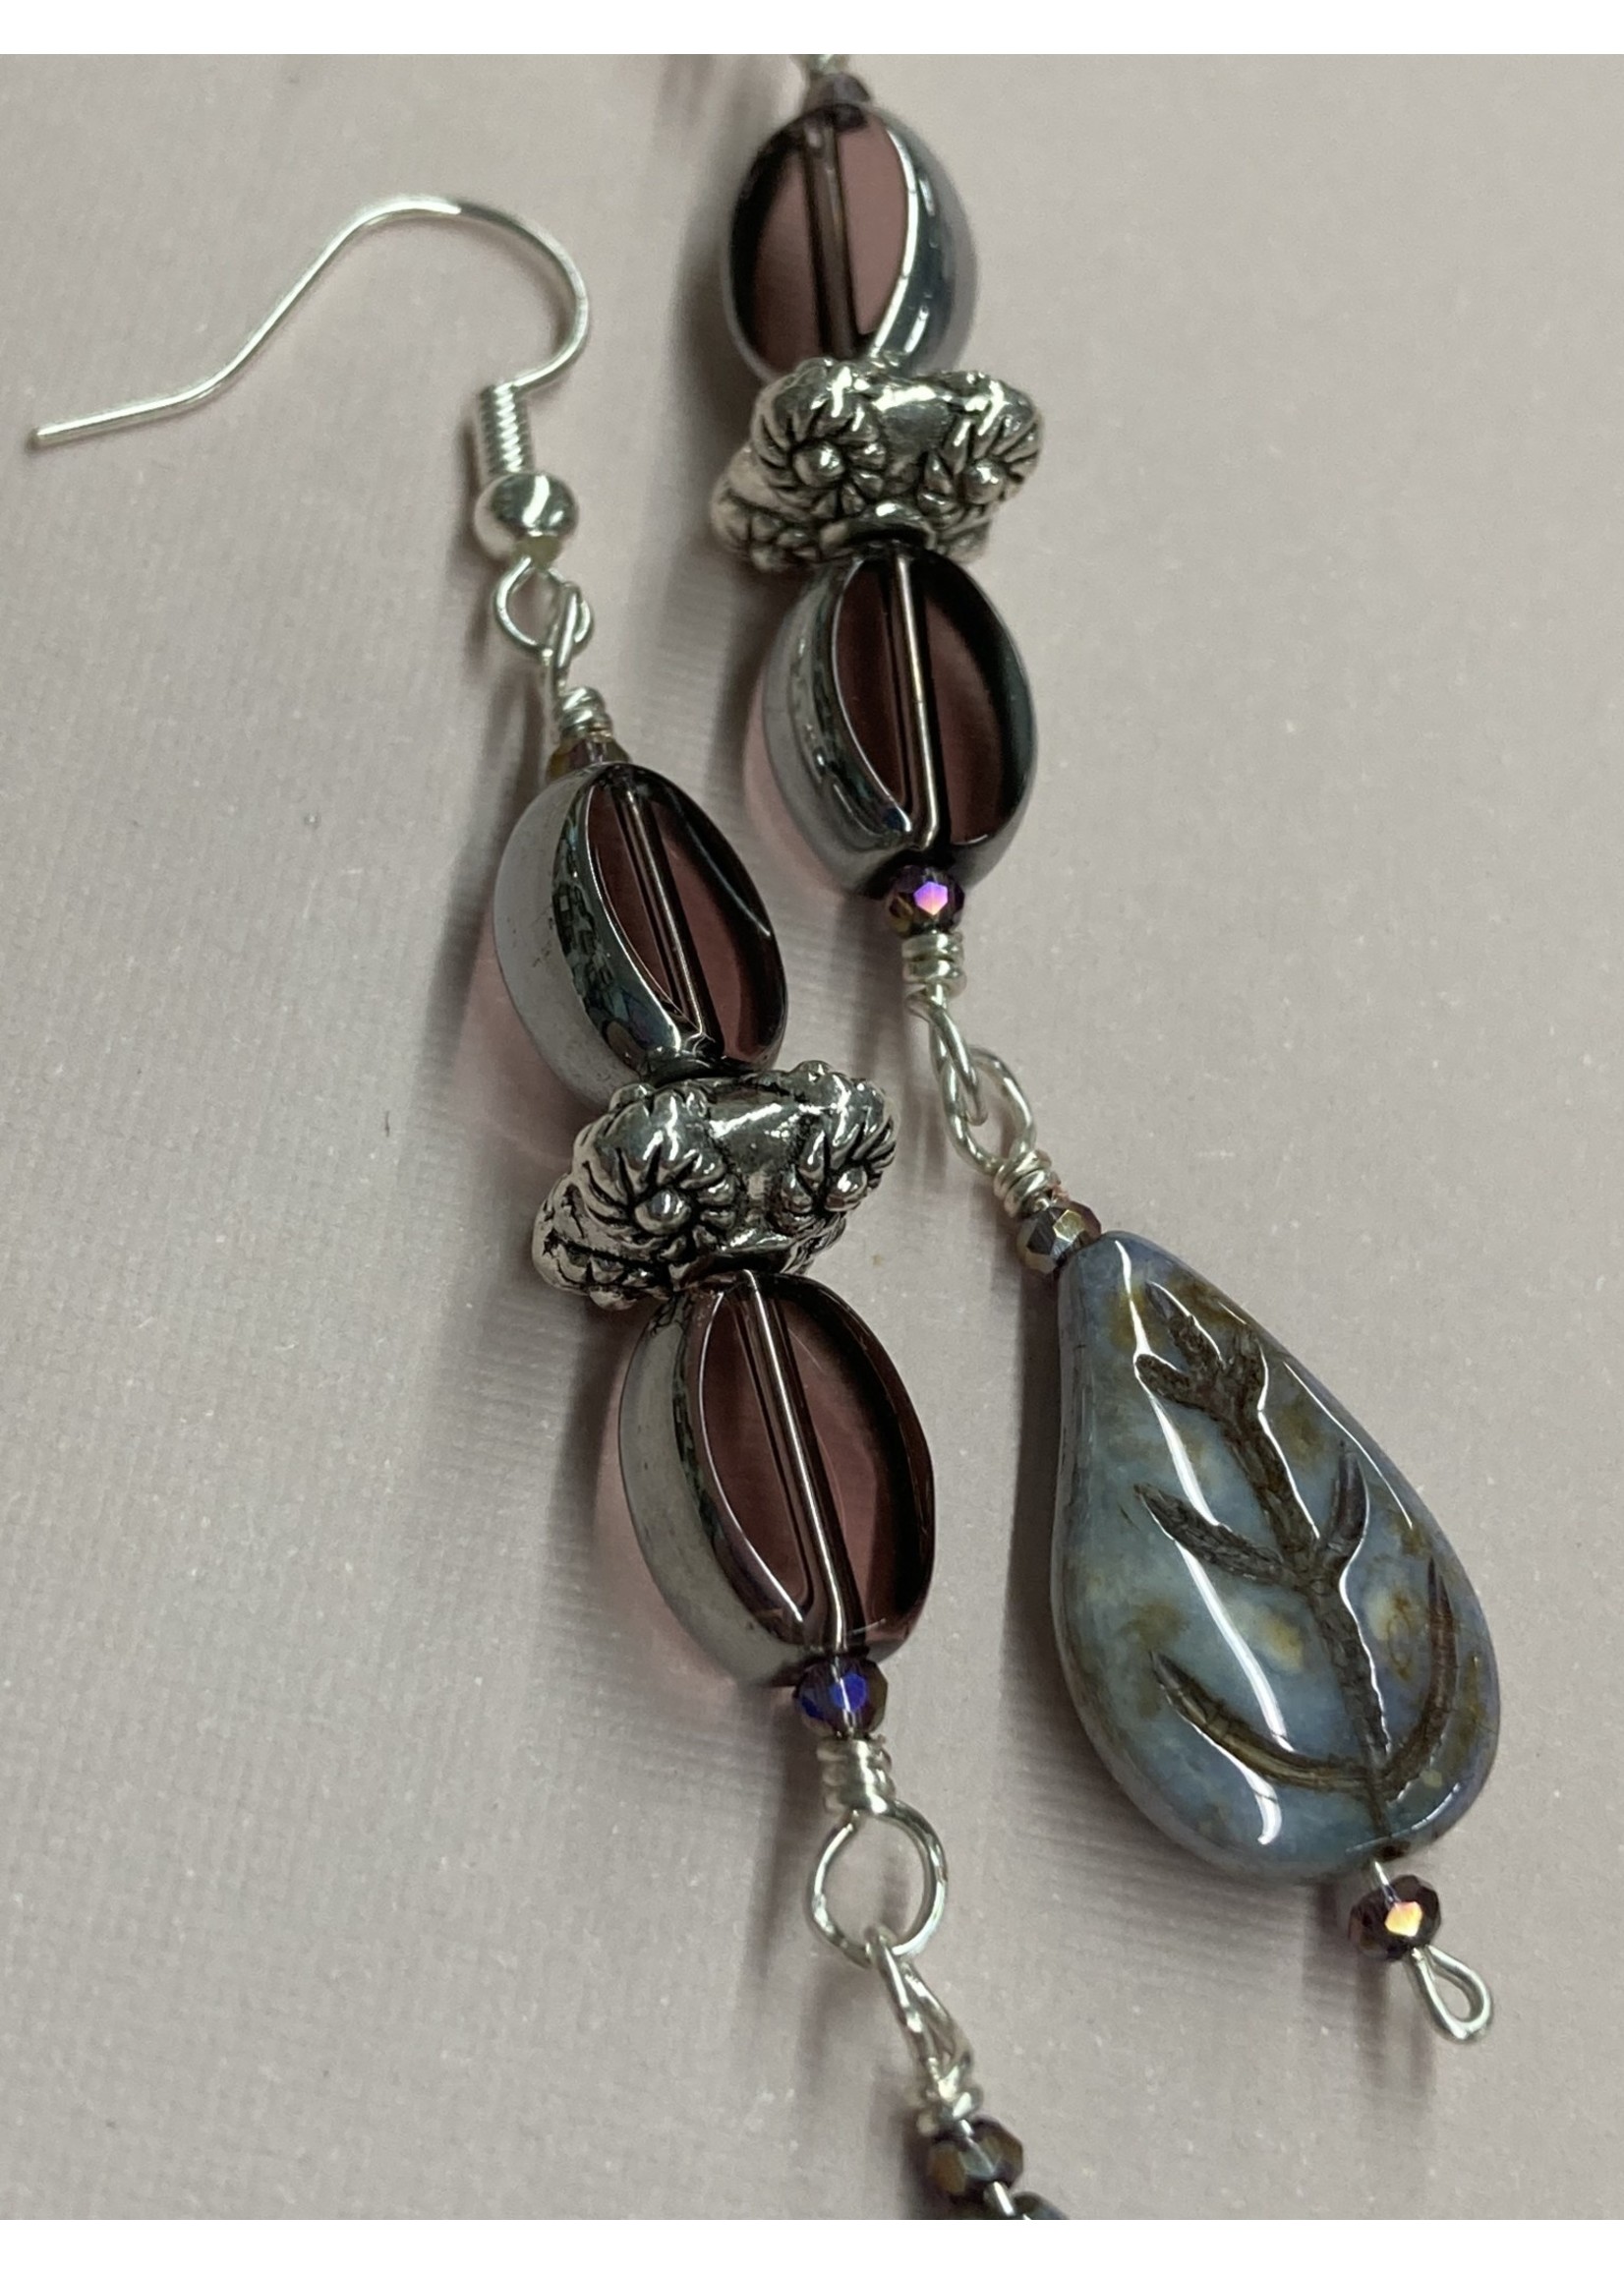 Our Twisted Dahlia E031 Lavender Glass Bead with Silver Accent and Czech Glass Leaf Earrings